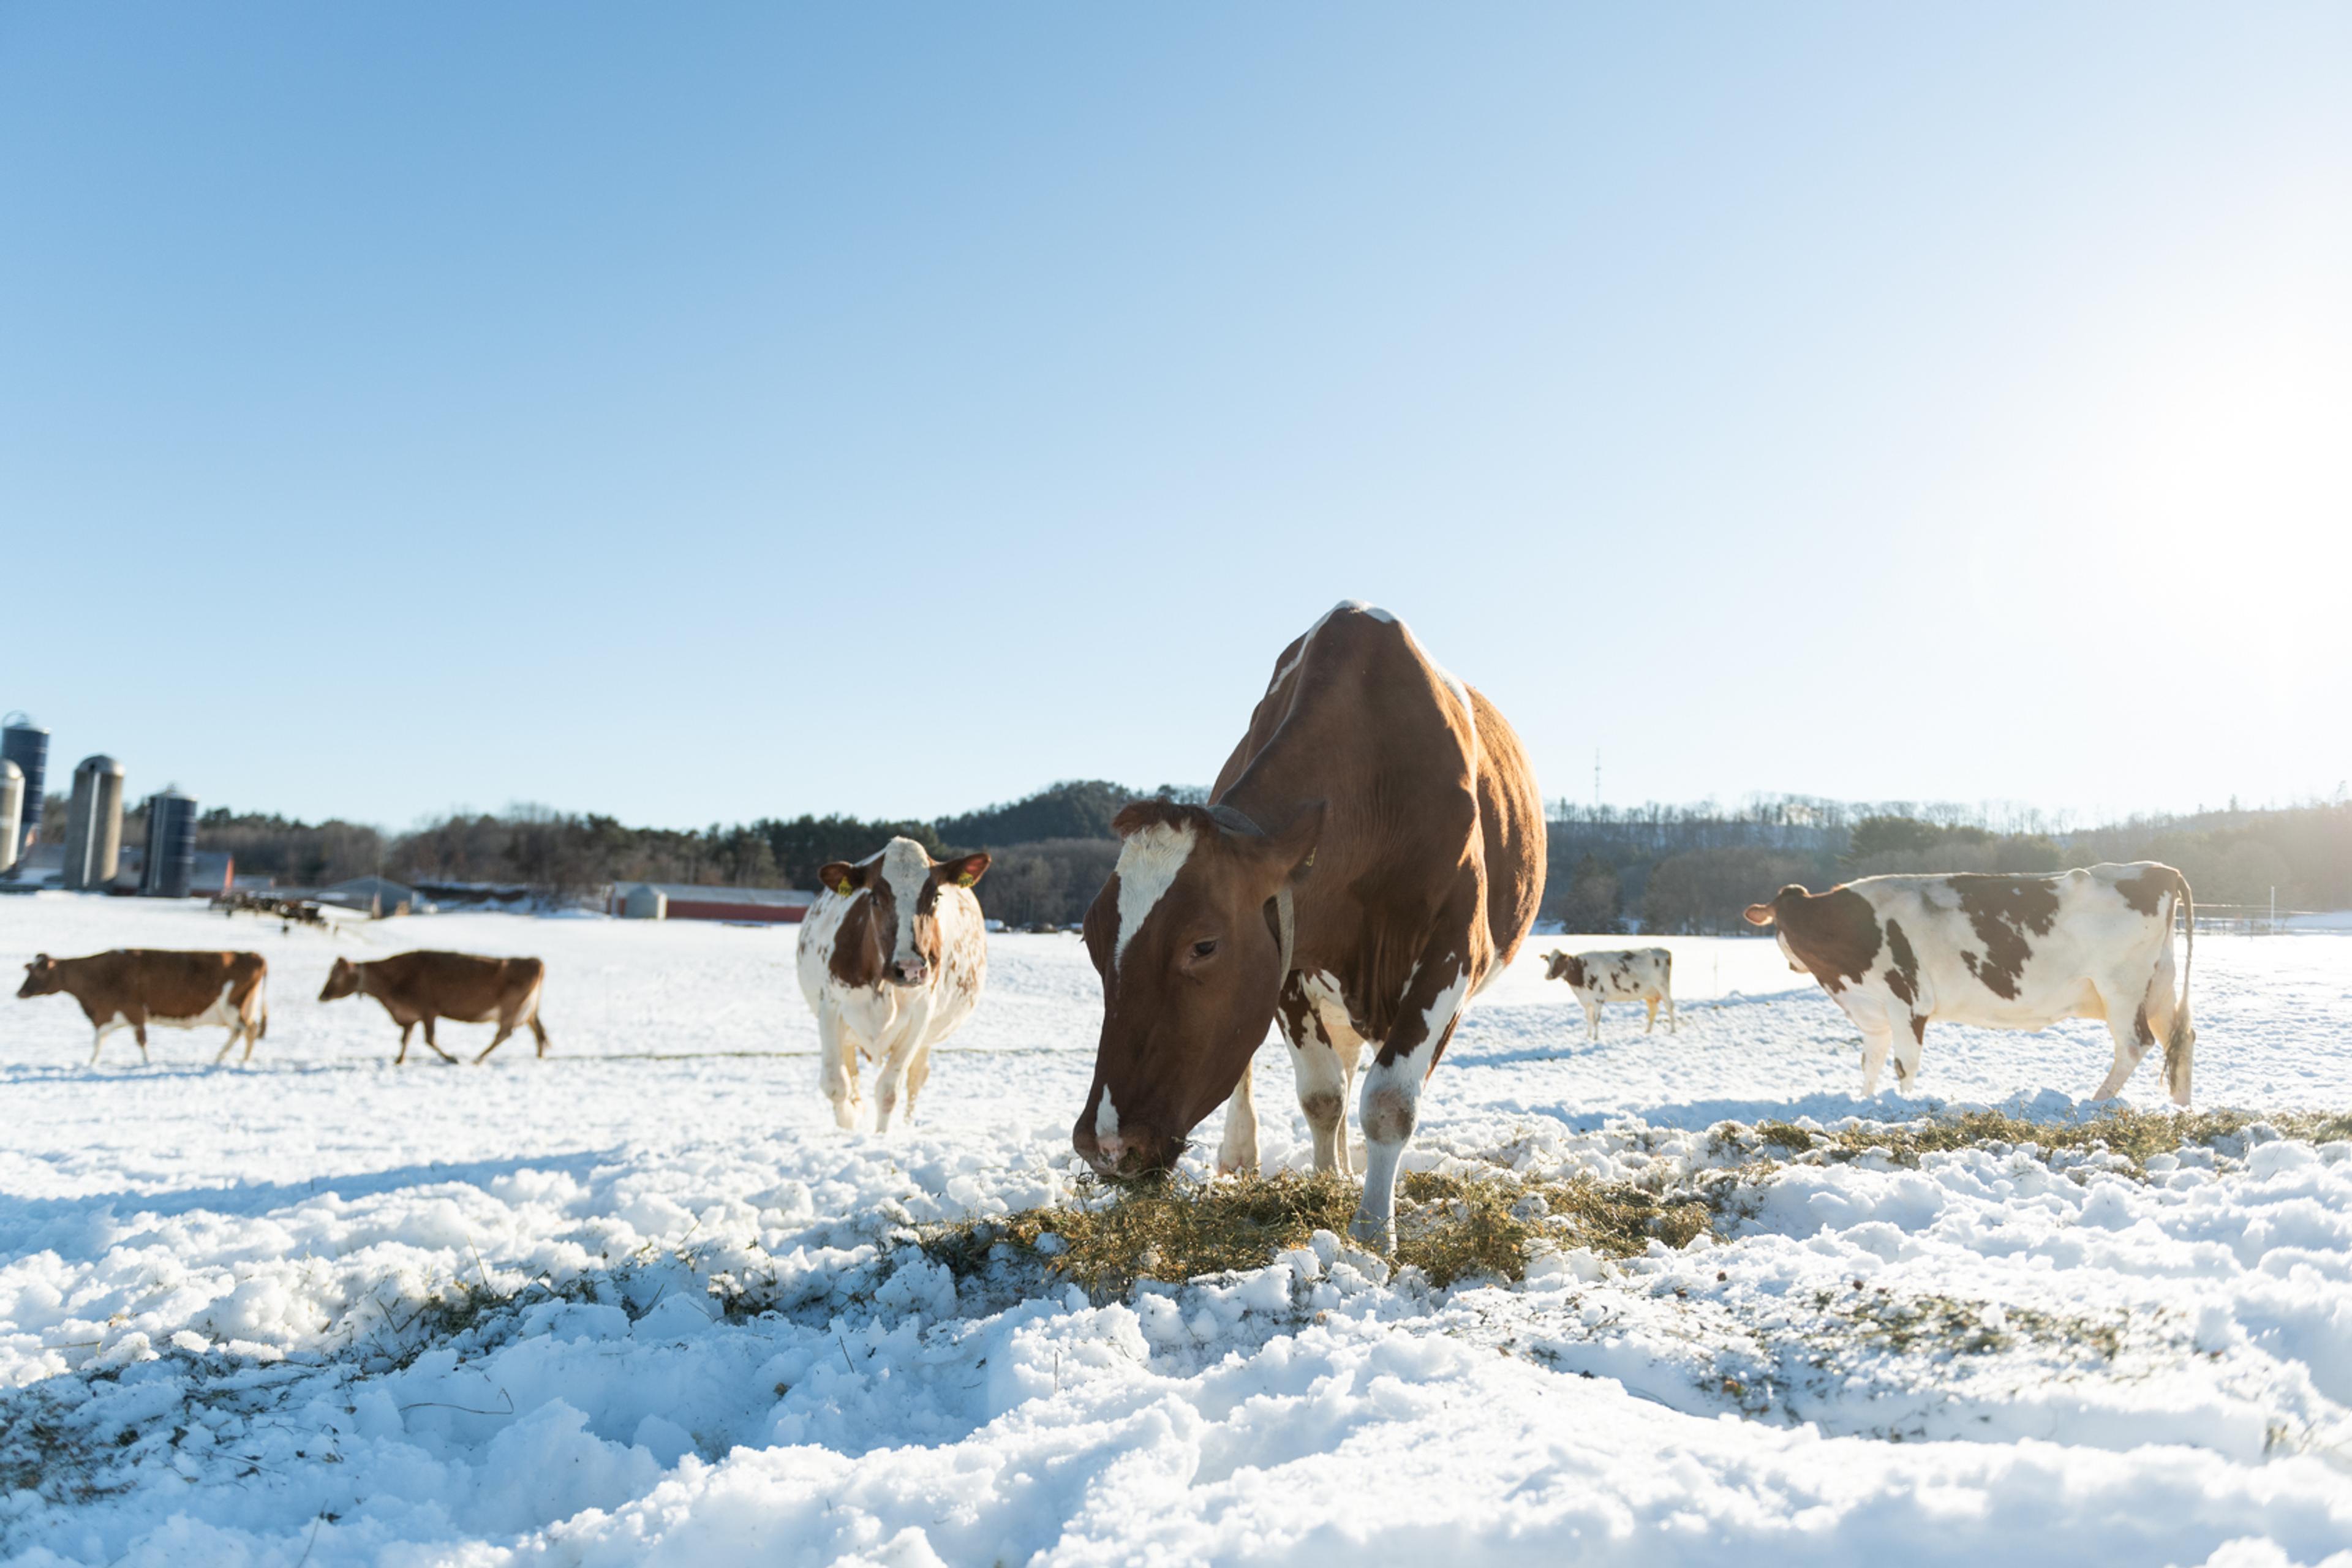 Cows eating forage grass outside on a snow-covered pasture.